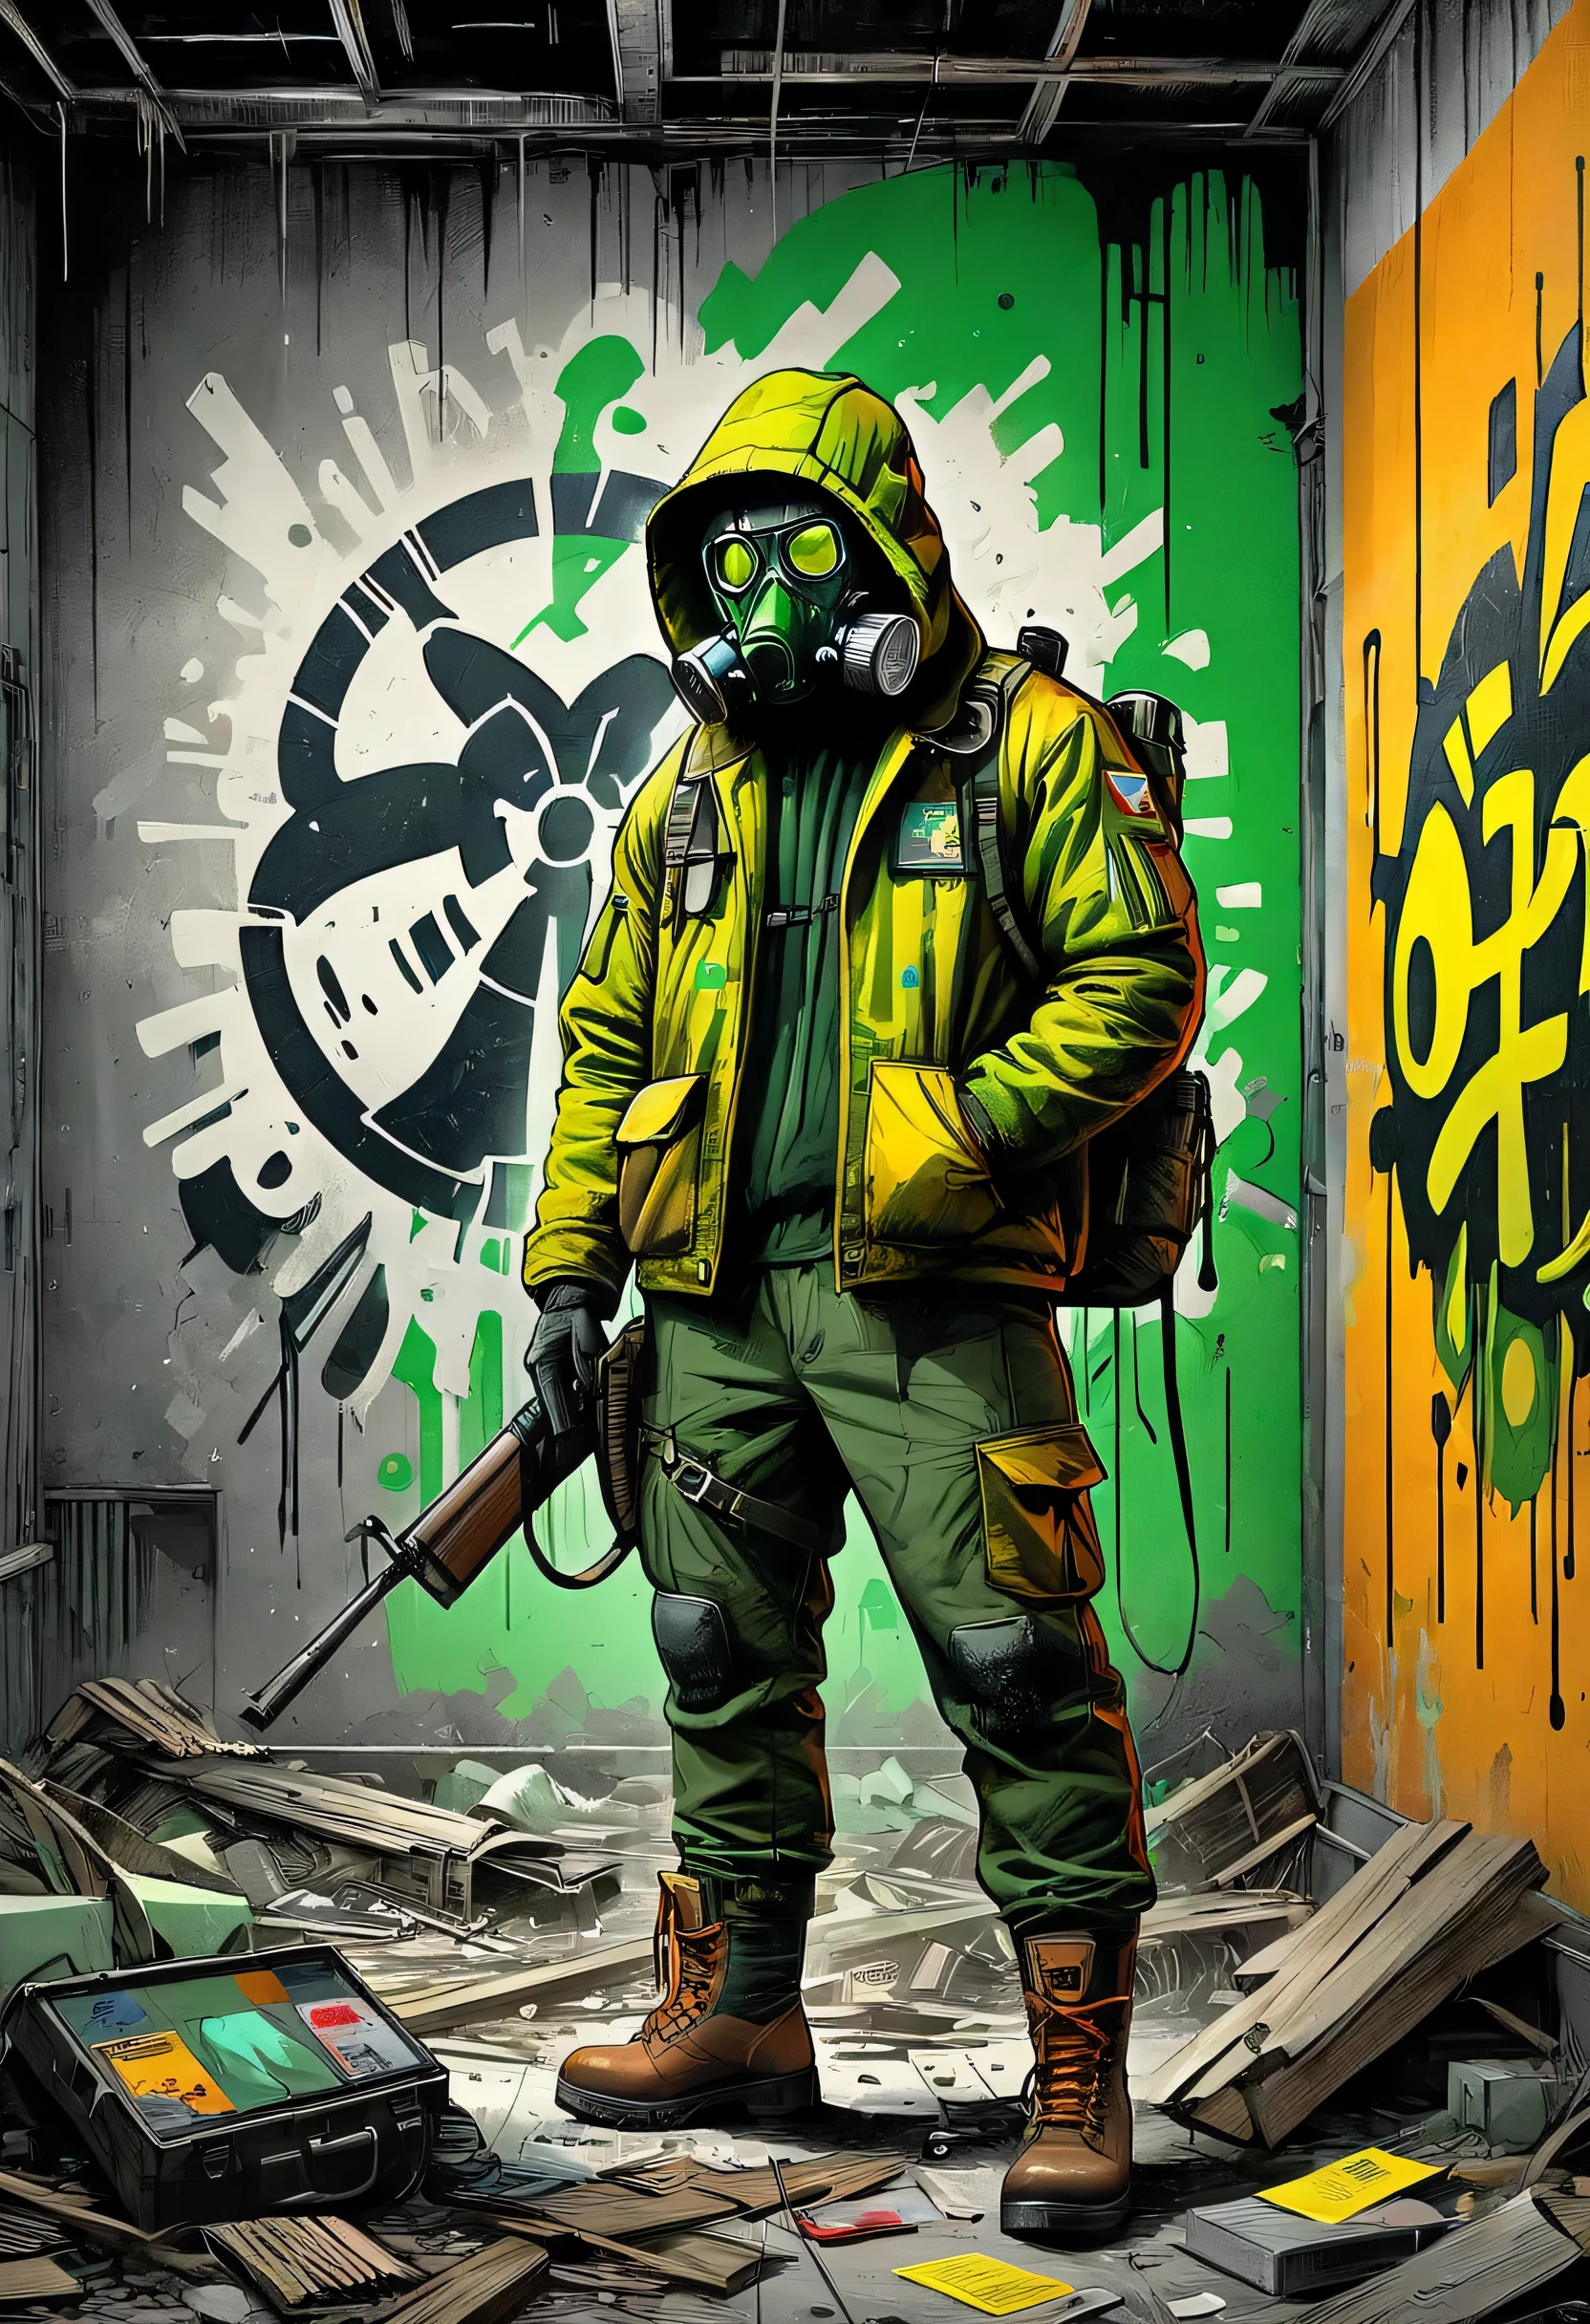 ((post apocalyptic Wasteland, abandoned place, debris, destruction, destroyed buildings graffiti on the walls:1.5)), ((Chernobyl, mutants, tattered clothes with hood and weapons, dynamic pose, epic:1.6)), ((dark background, full moon night:1.4)), (masterpiece),(Best Quality:1.4), (ultra high resolution:1.4), detailed painting, (((dark colors, orange, green, yellow, Intricate:1.5) ), (( post apocalyptic:1.4 )), (( Best Quality, Vibrant, 32K, well-defined lights and shadows without text:1.3).